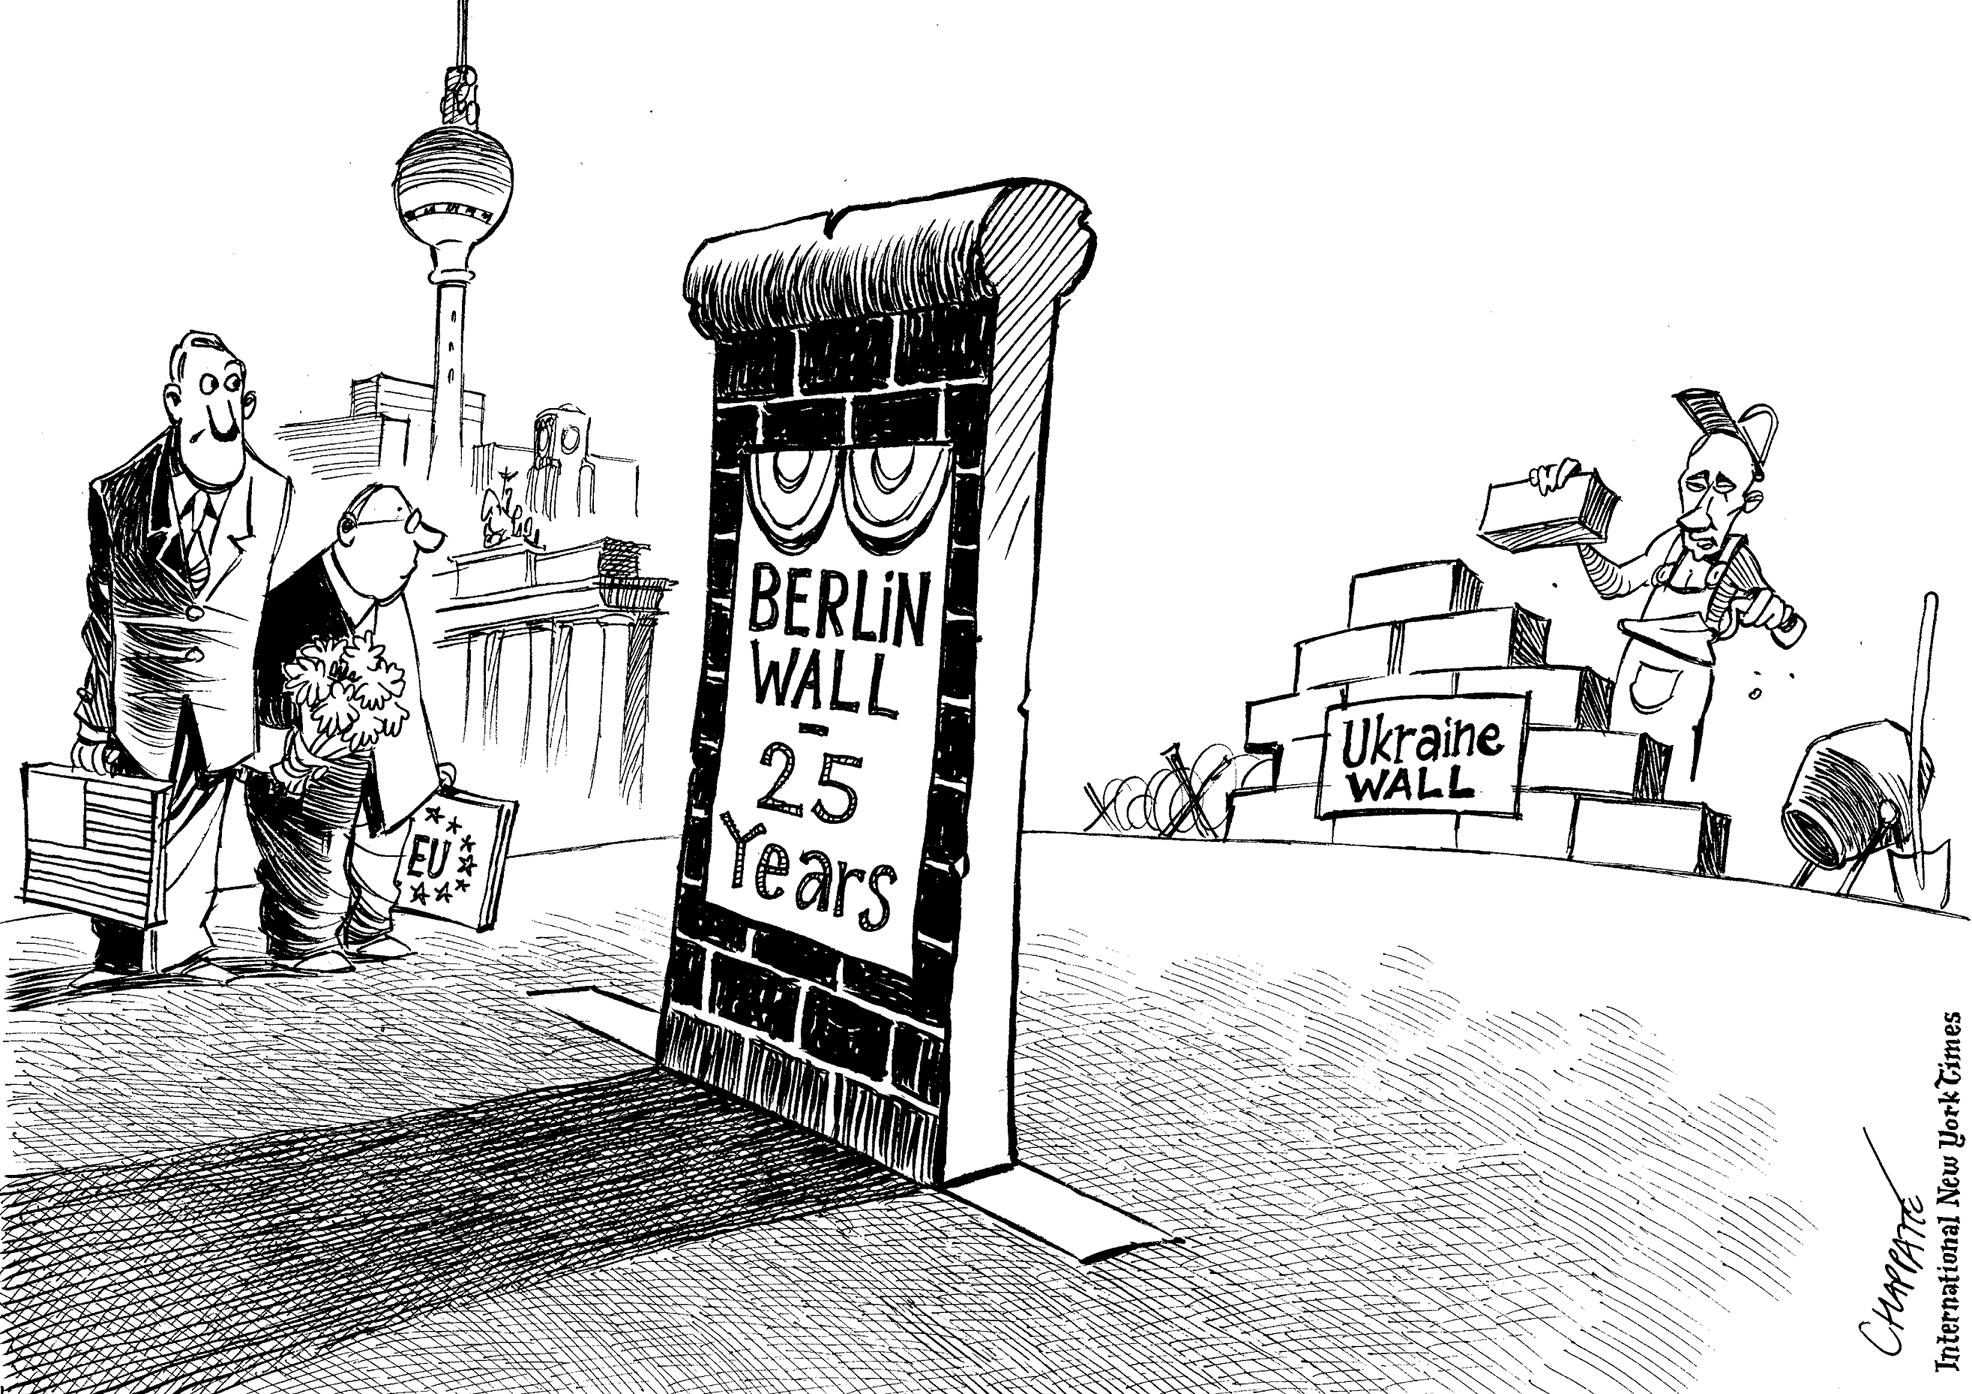 The Wall,25 years after